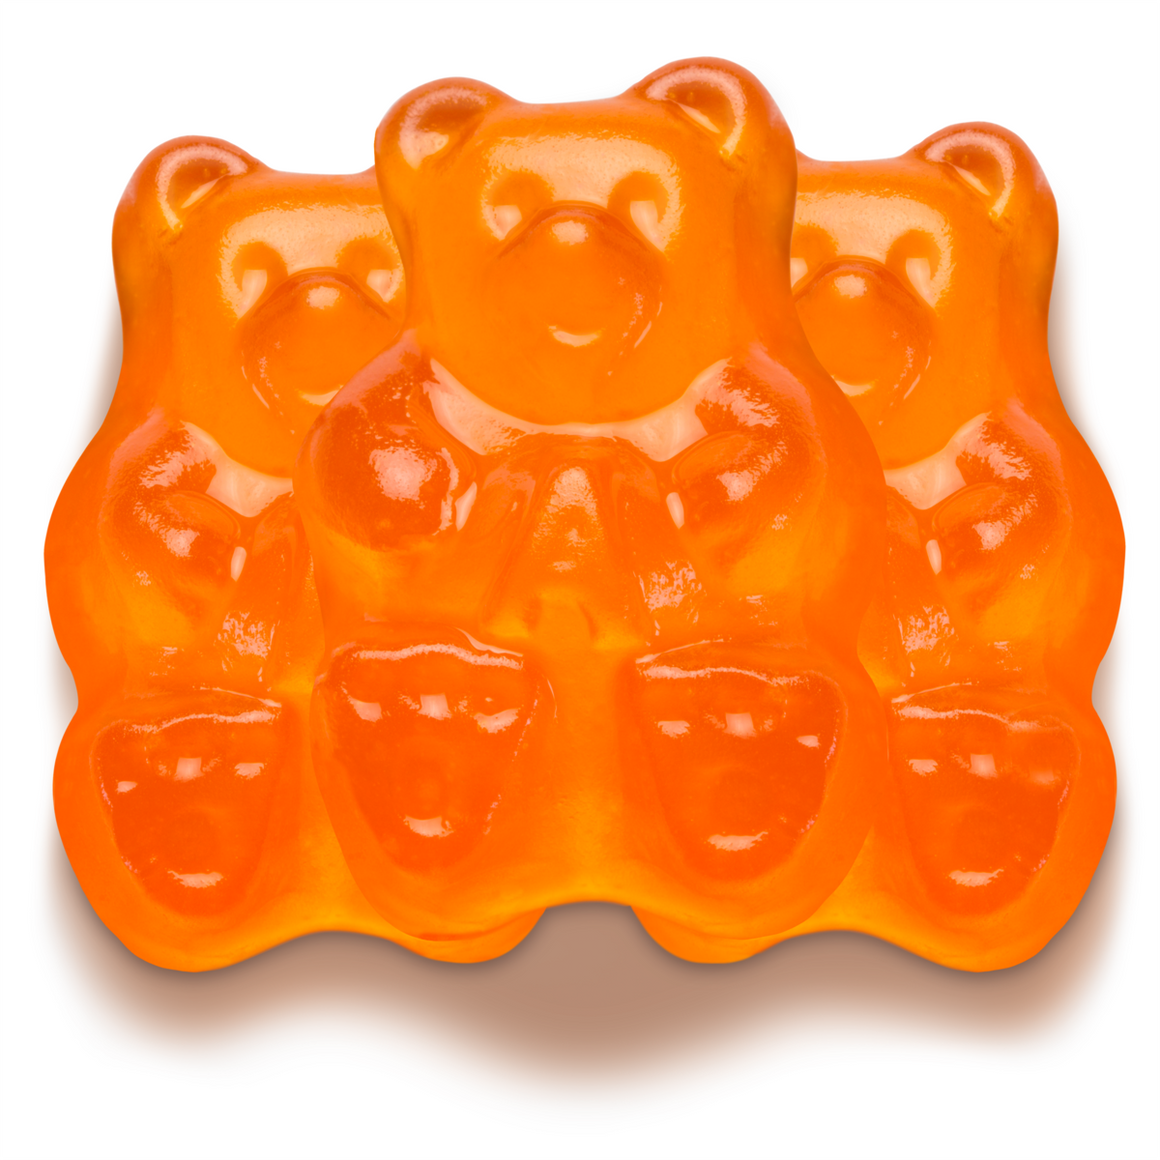 All City Candy Orange Gummi Bears - 5 LB Bulk Bag Bulk Unwrapped Albanese Confectionery For fresh candy and great service, visit www.allcitycandy.com